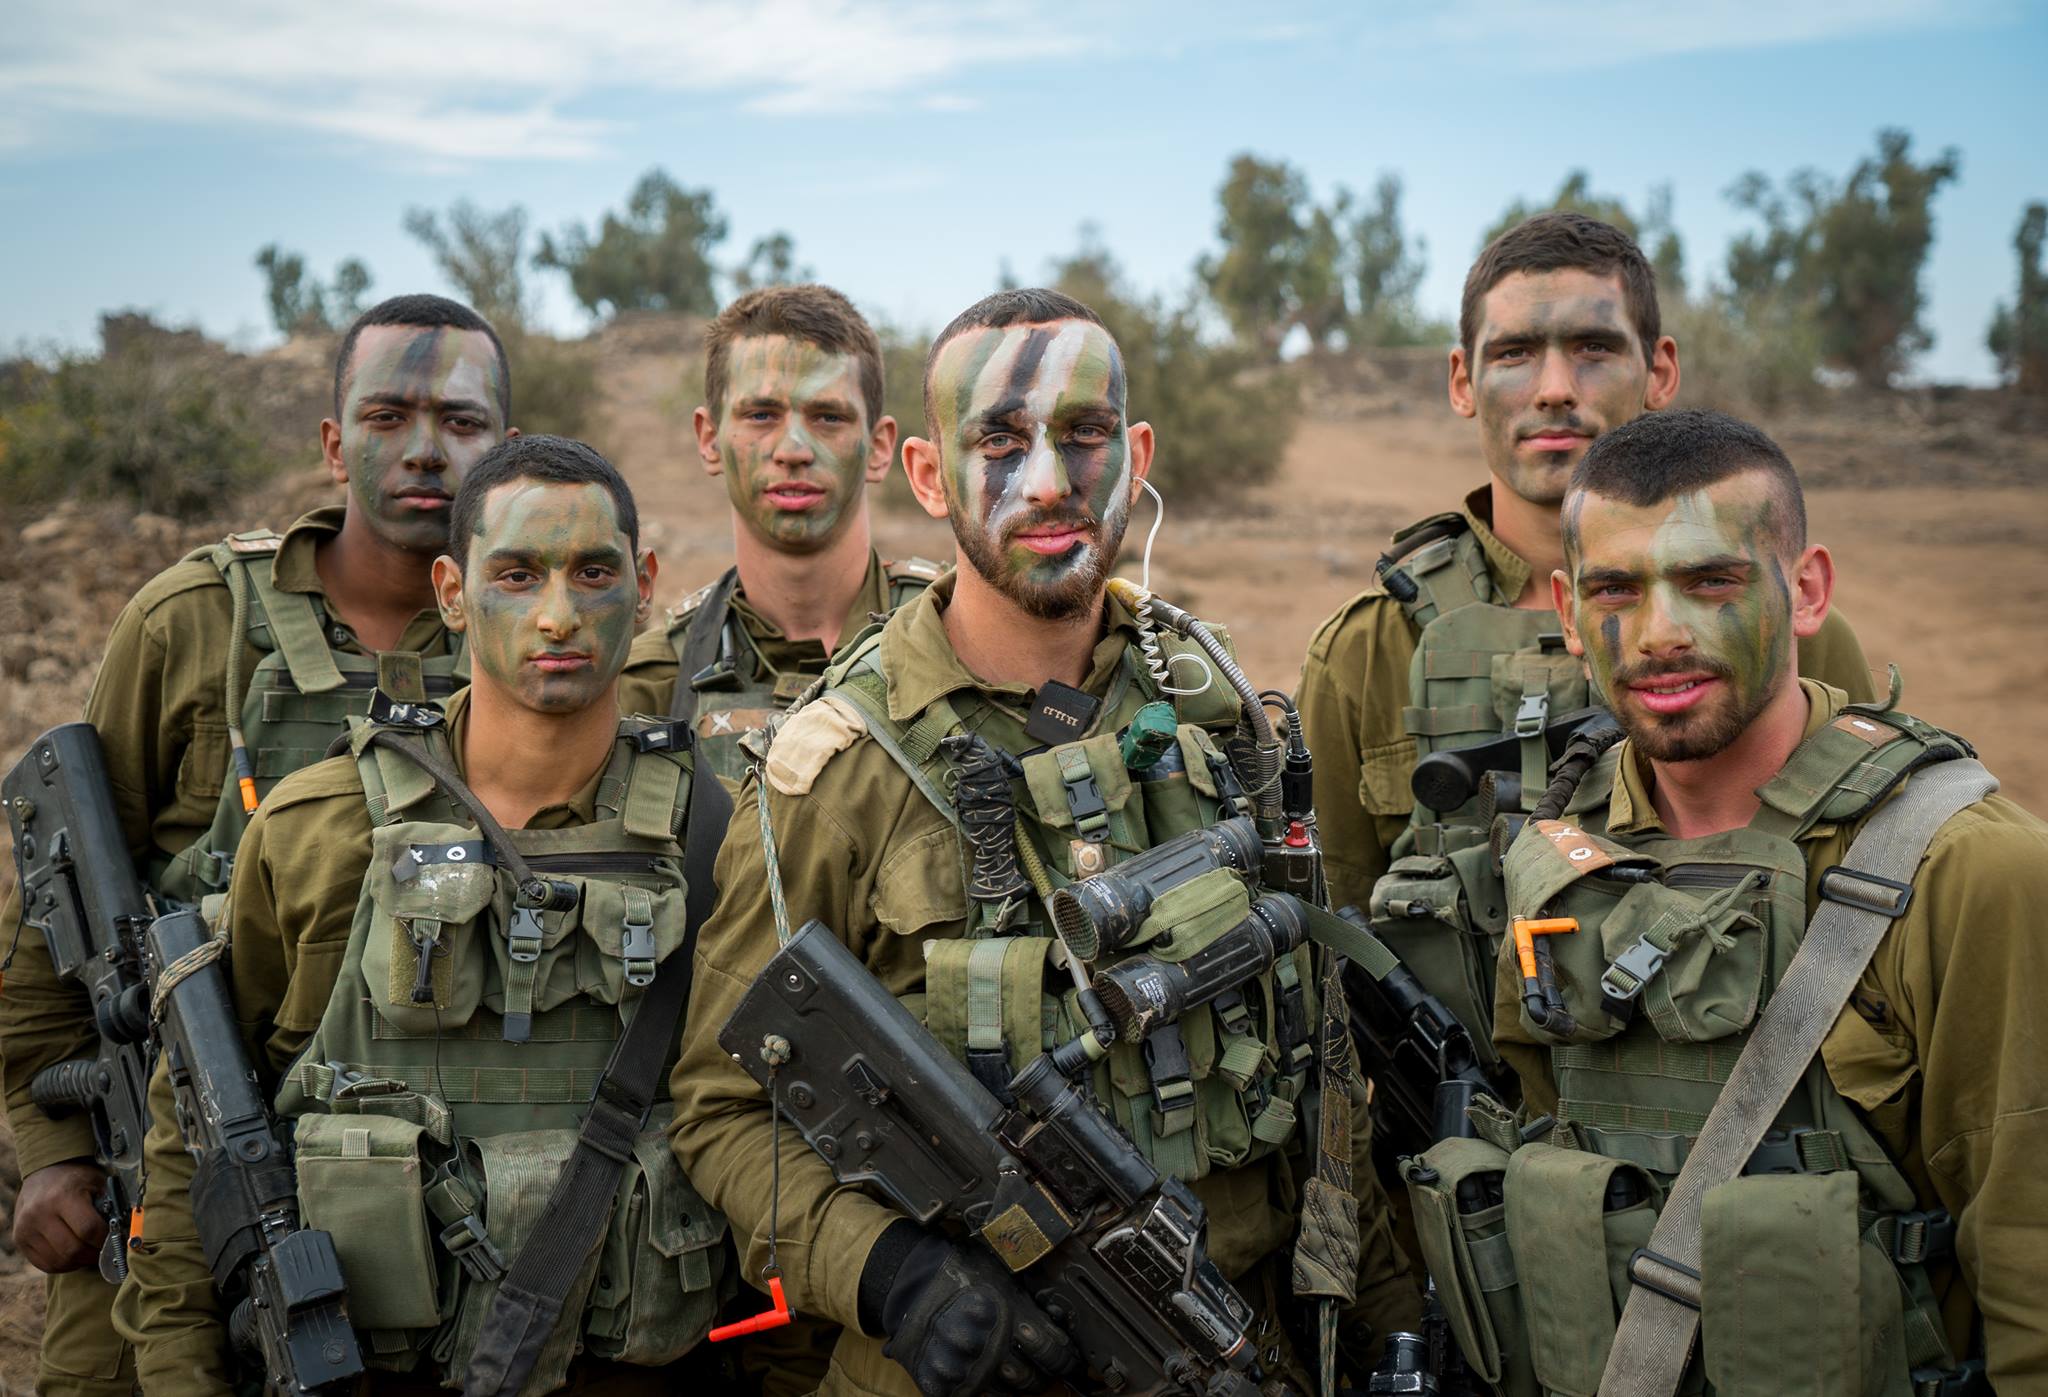 A group of IDF soldiers with full gear and war painted faces